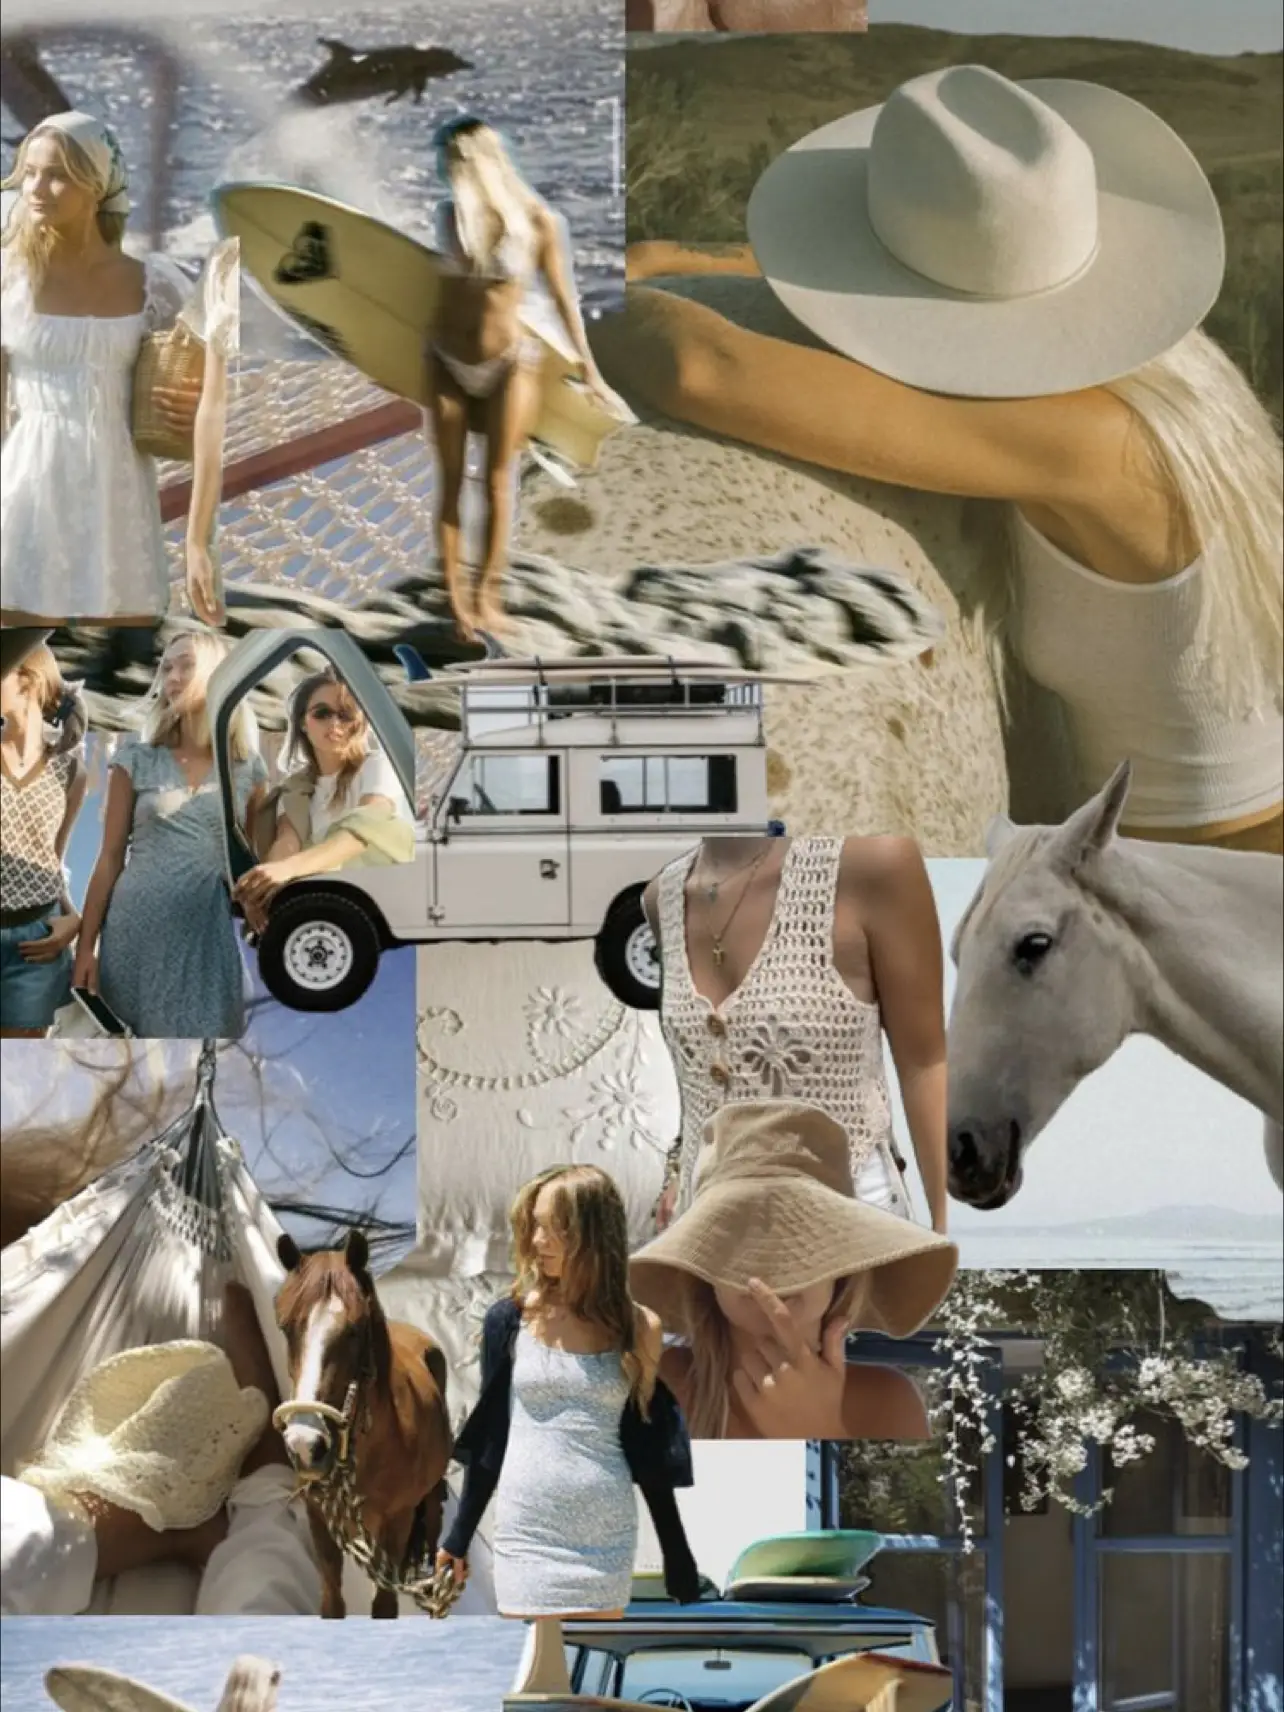  A collage of photos of a woman in a white dress and a man.